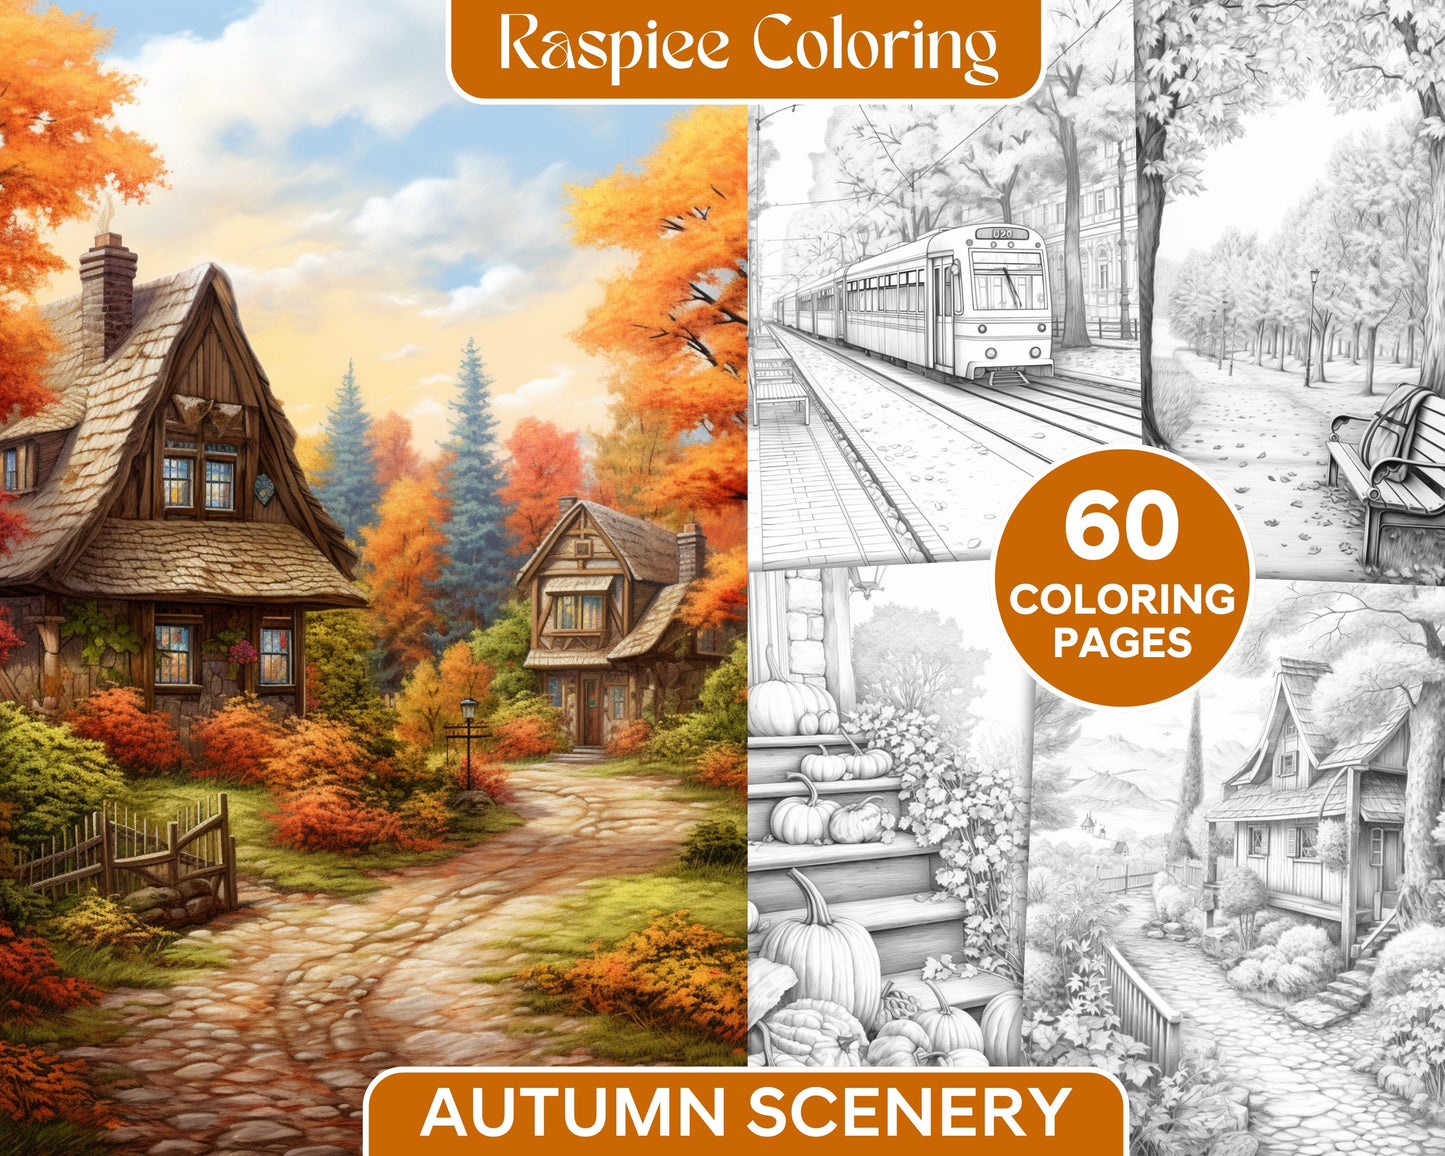 Autumn Scenery Grayscale Coloring Page for Adults, Printable Fall Season Coloring Book, Nature Scenes in Grayscale for Relaxation, Autumn Leaves Coloring Sheets, Digital Download Adult Coloring Pages